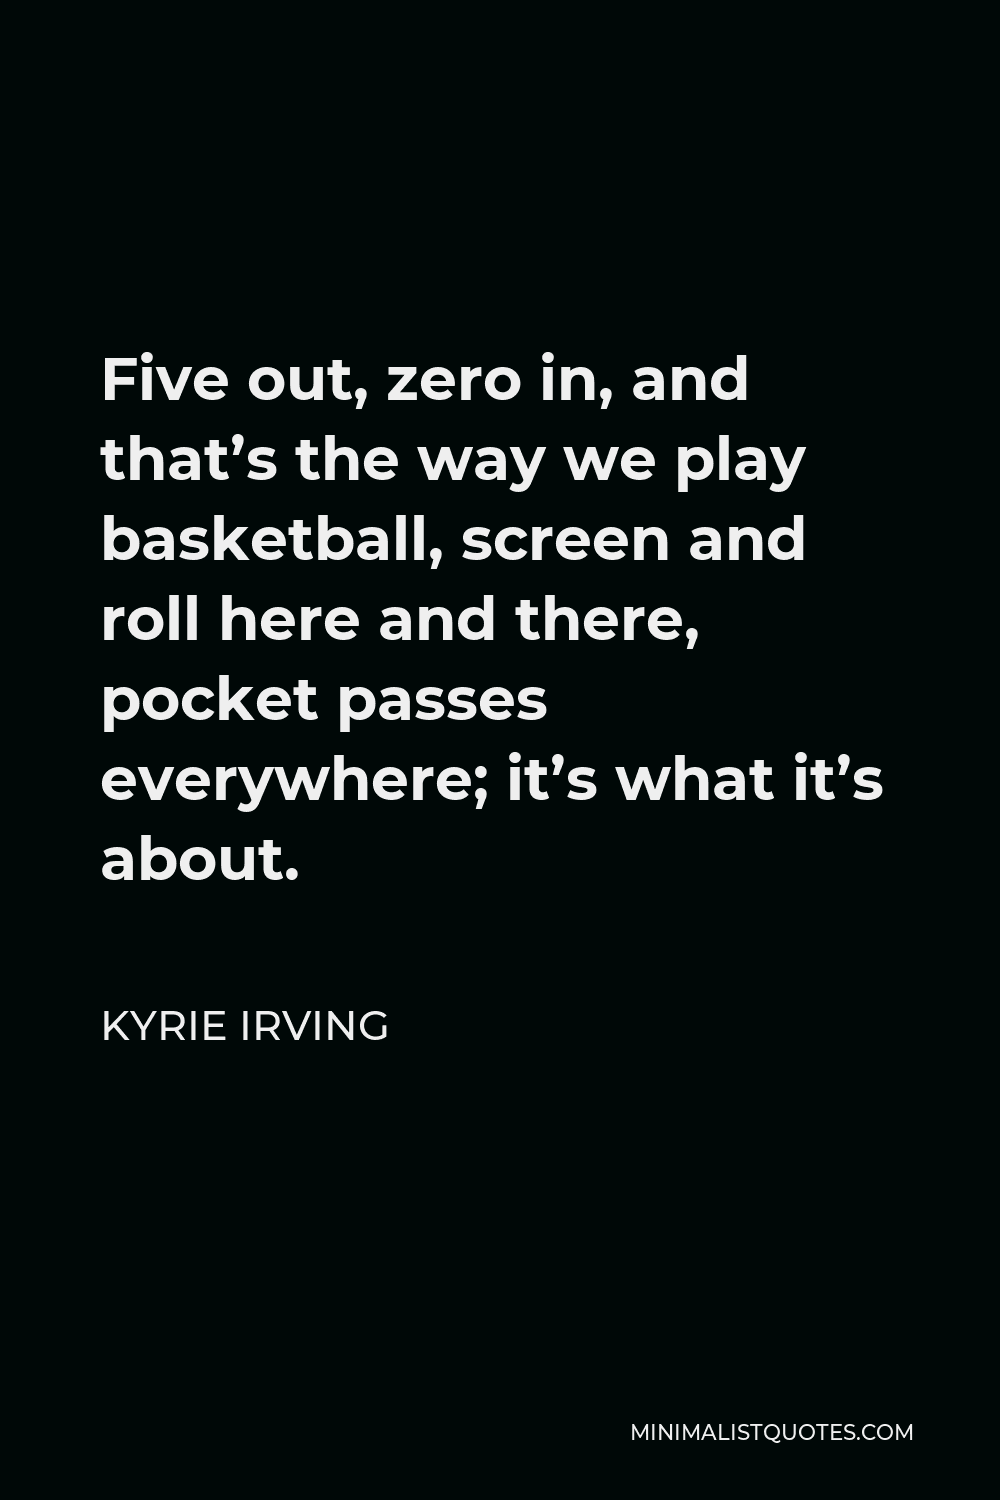 Kyrie Irving Quote - Five out, zero in, and that’s the way we play basketball, screen and roll here and there, pocket passes everywhere; it’s what it’s about.